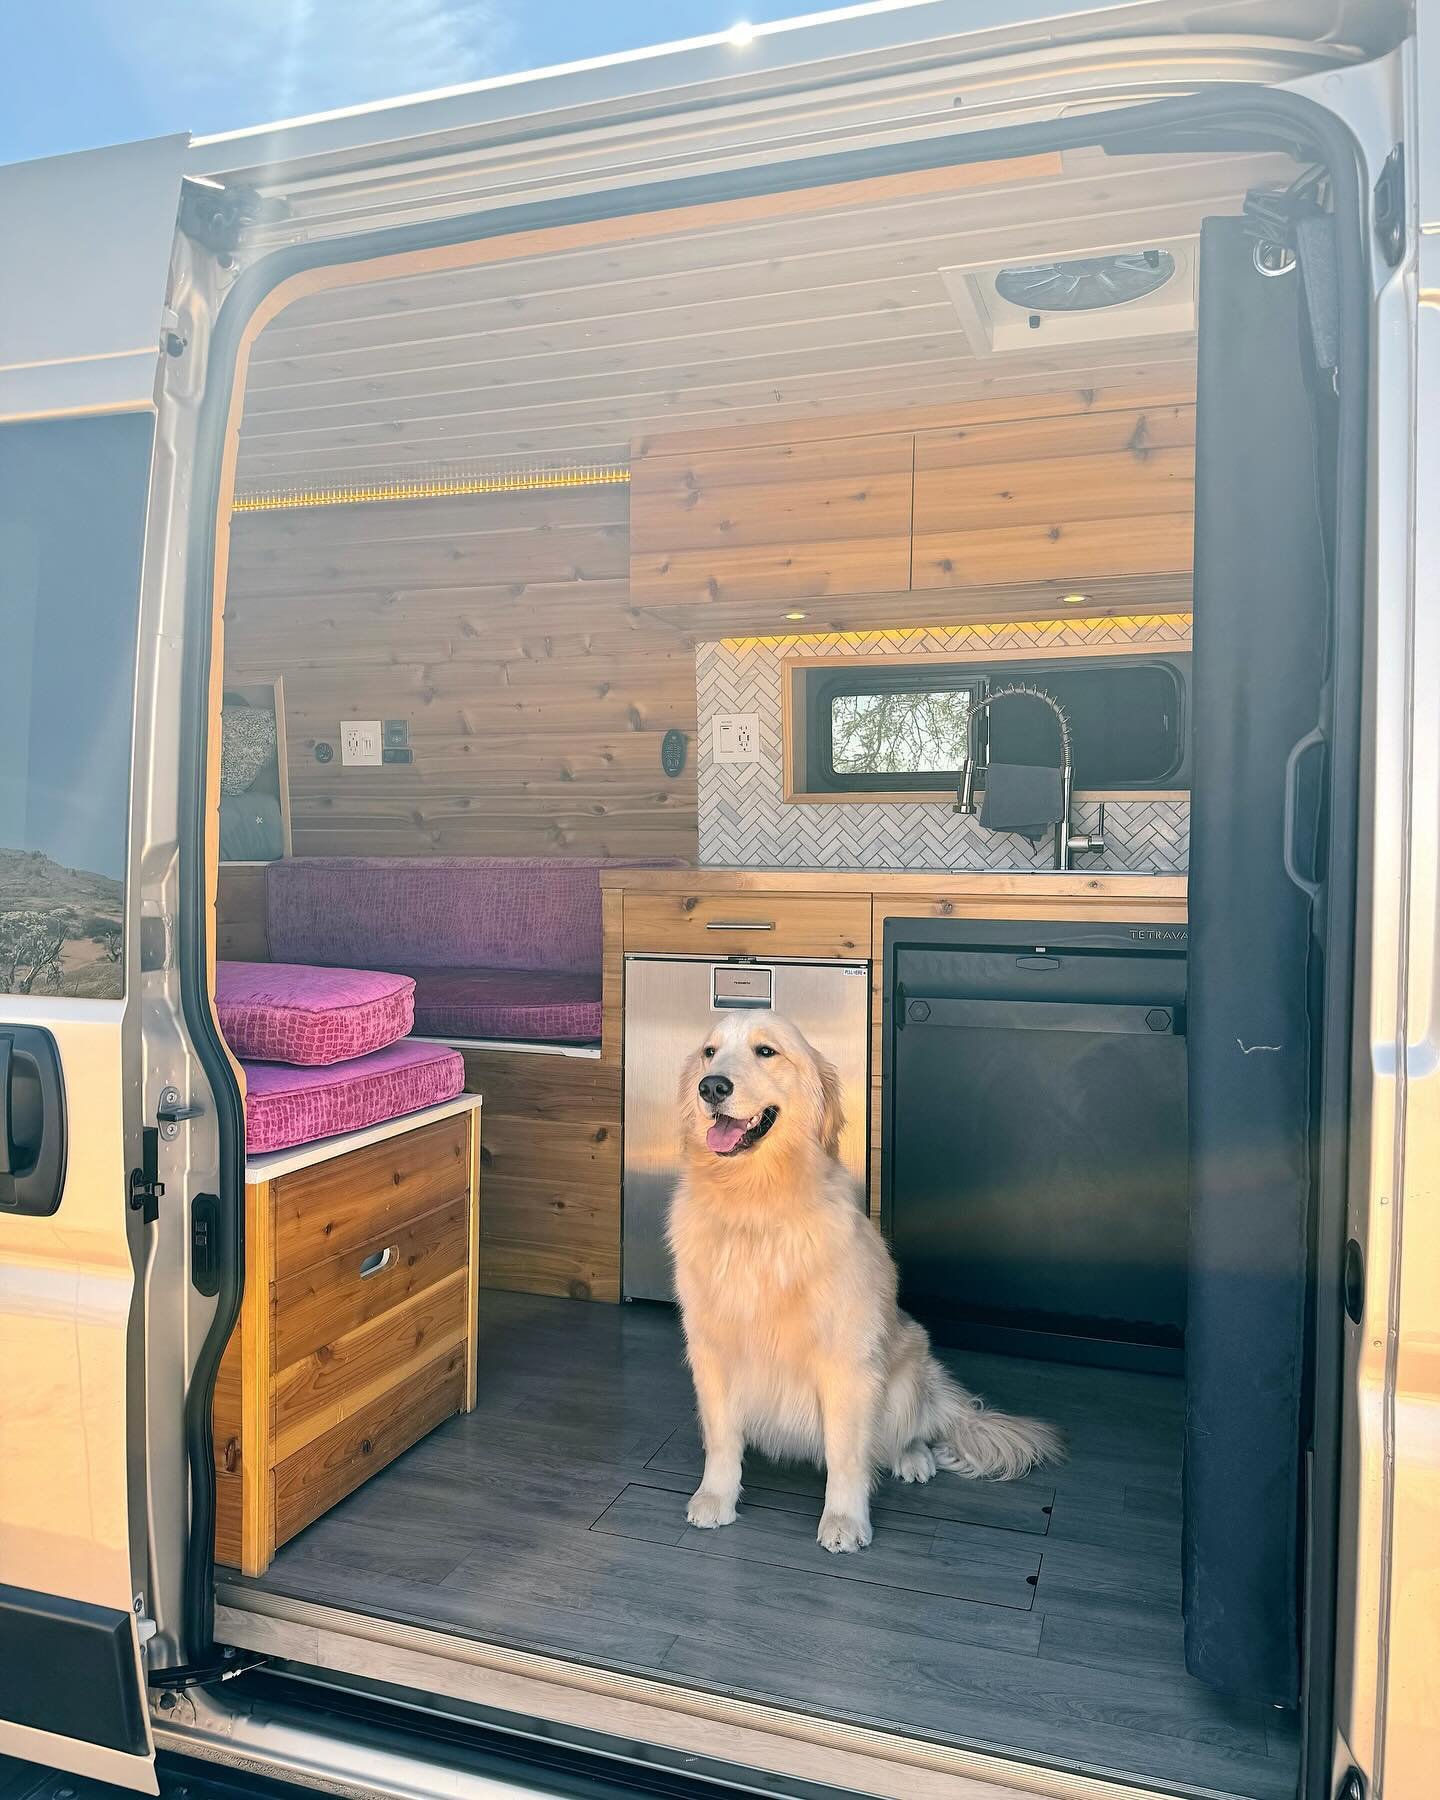 Did you know⁉️No need to board your furry friends when you go on a roadtrip with us: All our vans are pet-friendly (requires an extra cleaning fee, but worth it!) 🐶🚐 #petfriendly #vacationideas